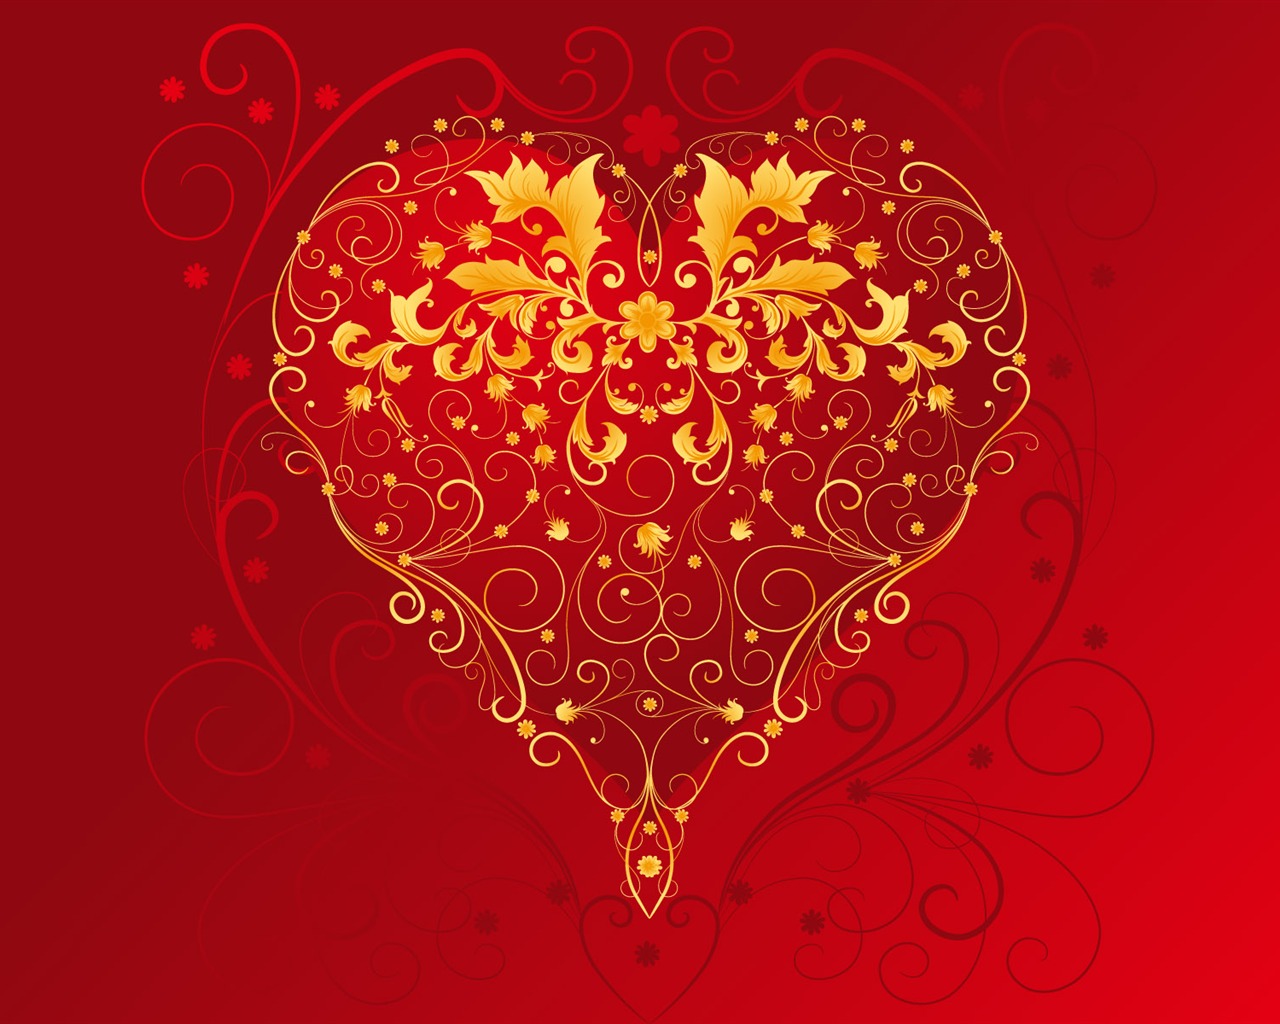 Valentine's Day Theme Wallpapers (6) #18 - 1280x1024